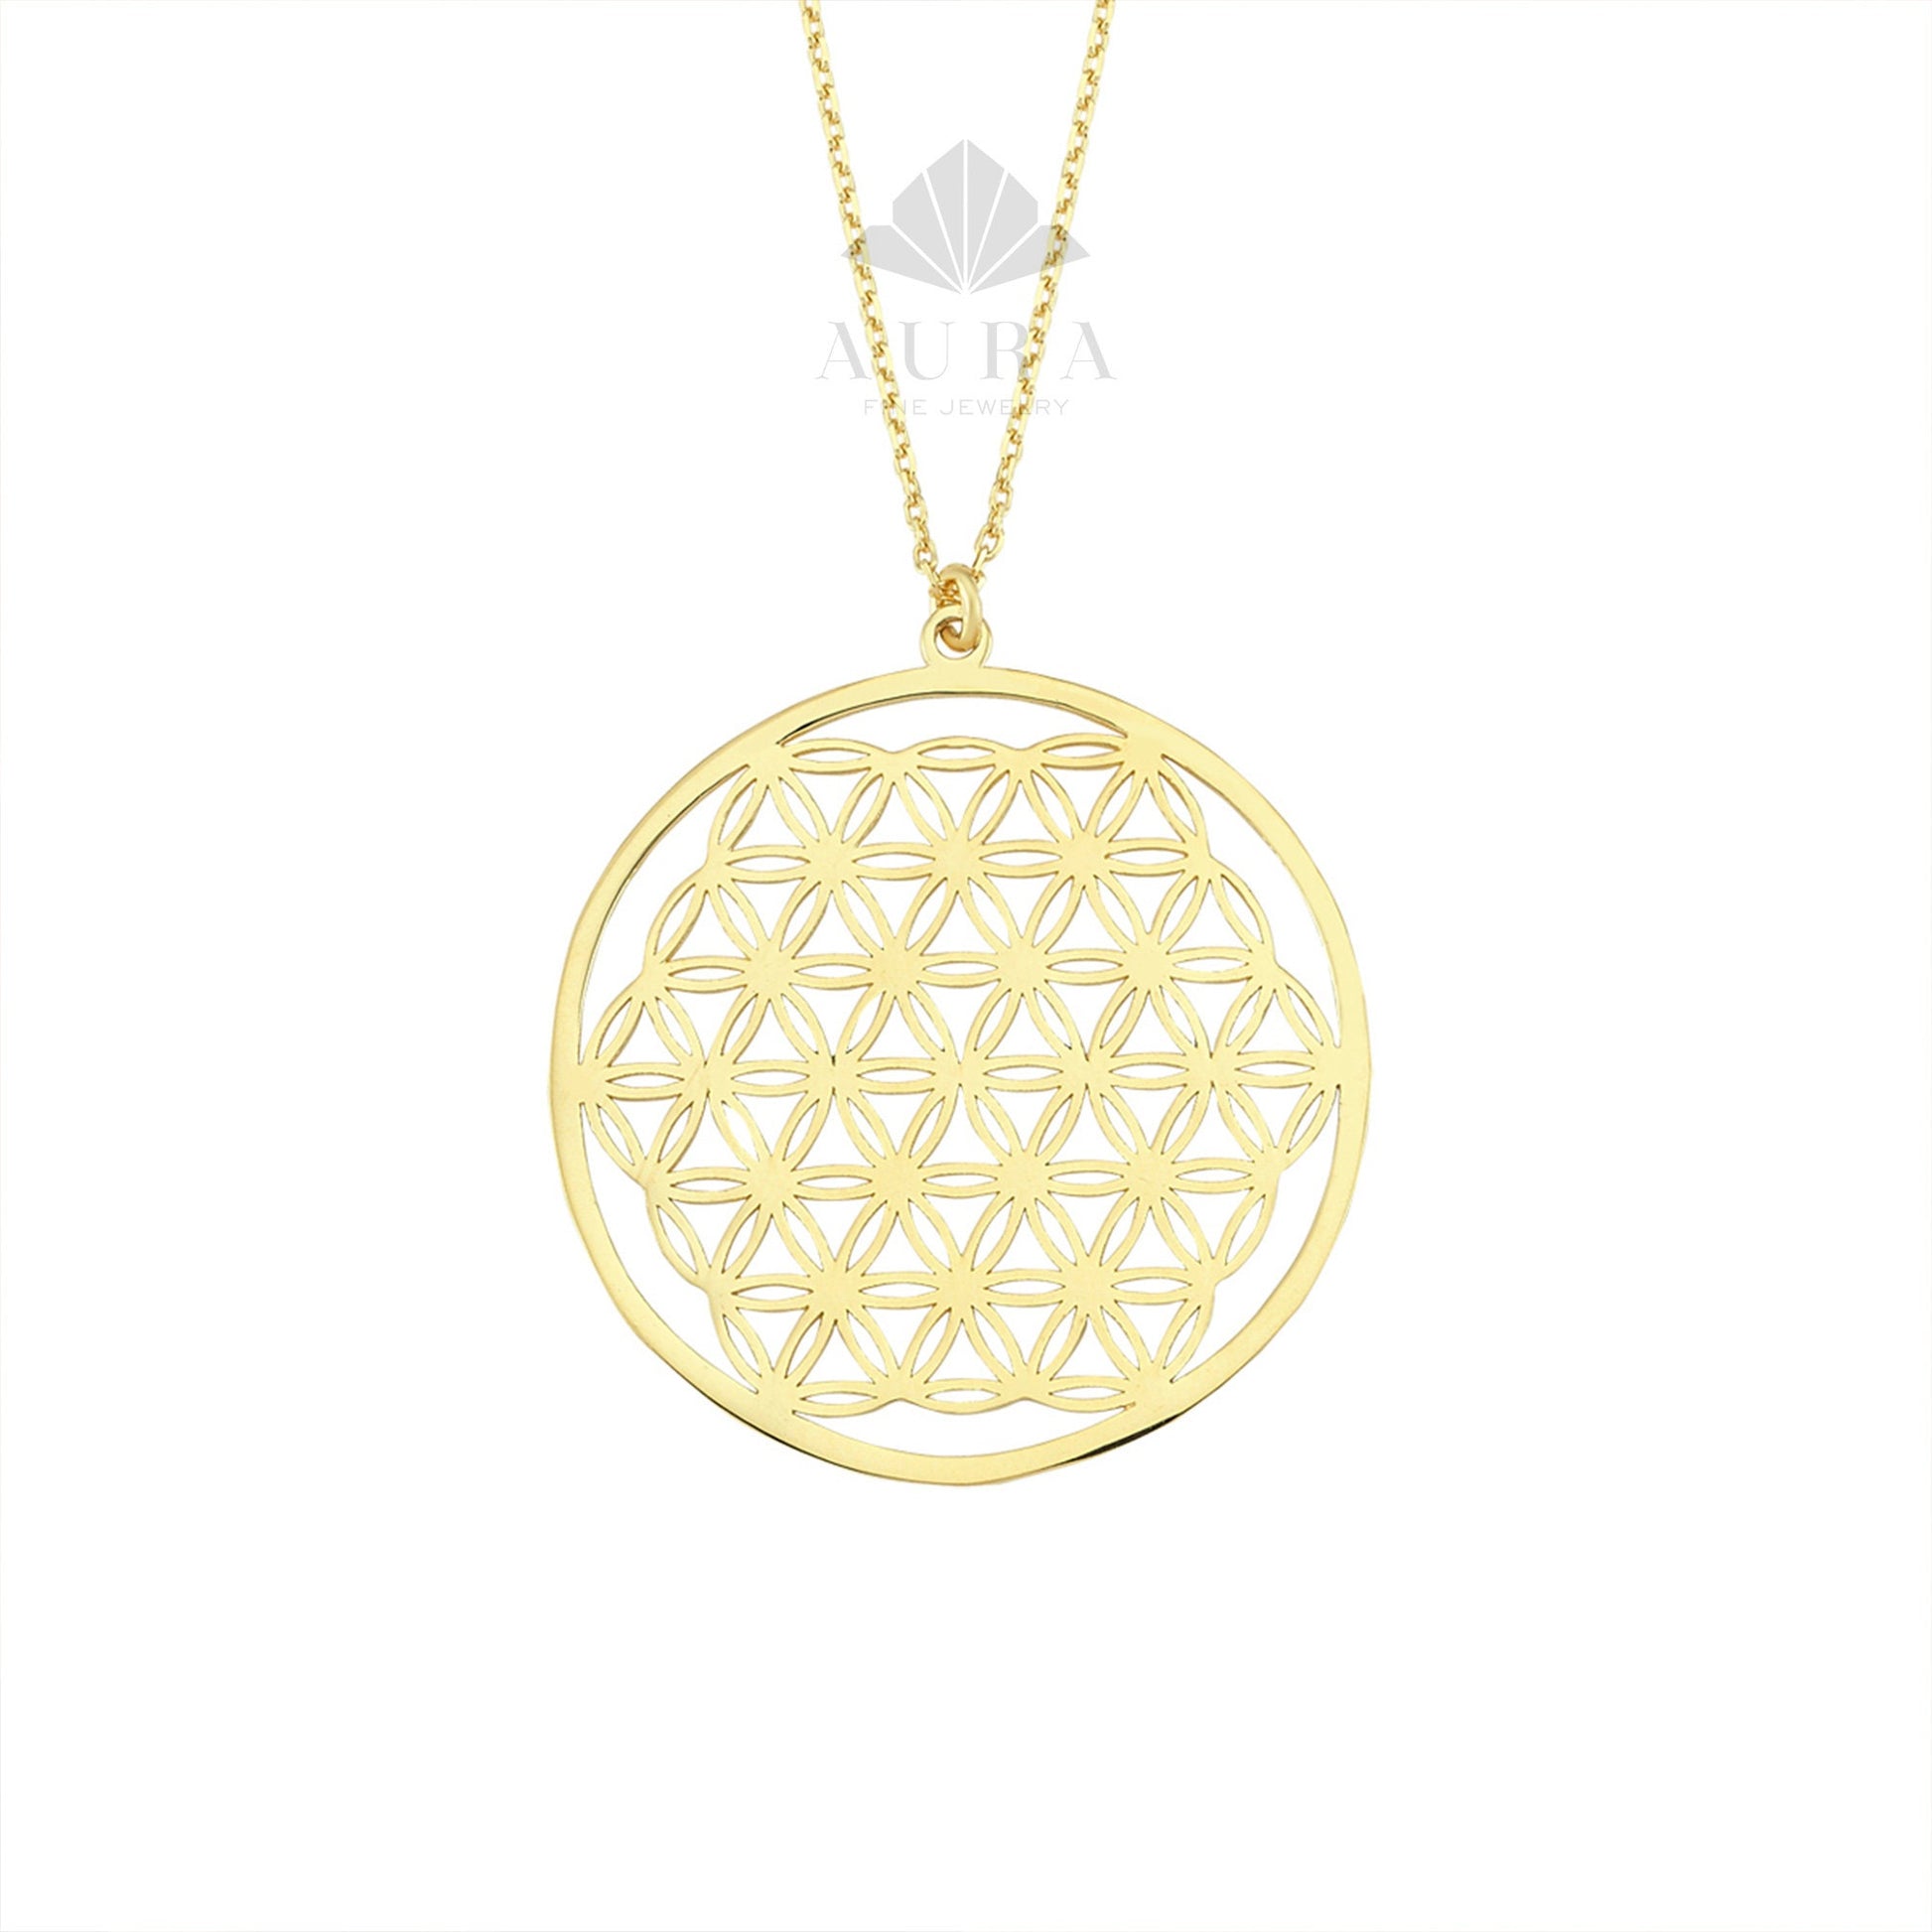 14K Gold Flower Of Life Necklace, Seed of Life Necklace, Handmade Necklace, Flower Of Life Pendant, Geometry Medallion, Anniversary Gift